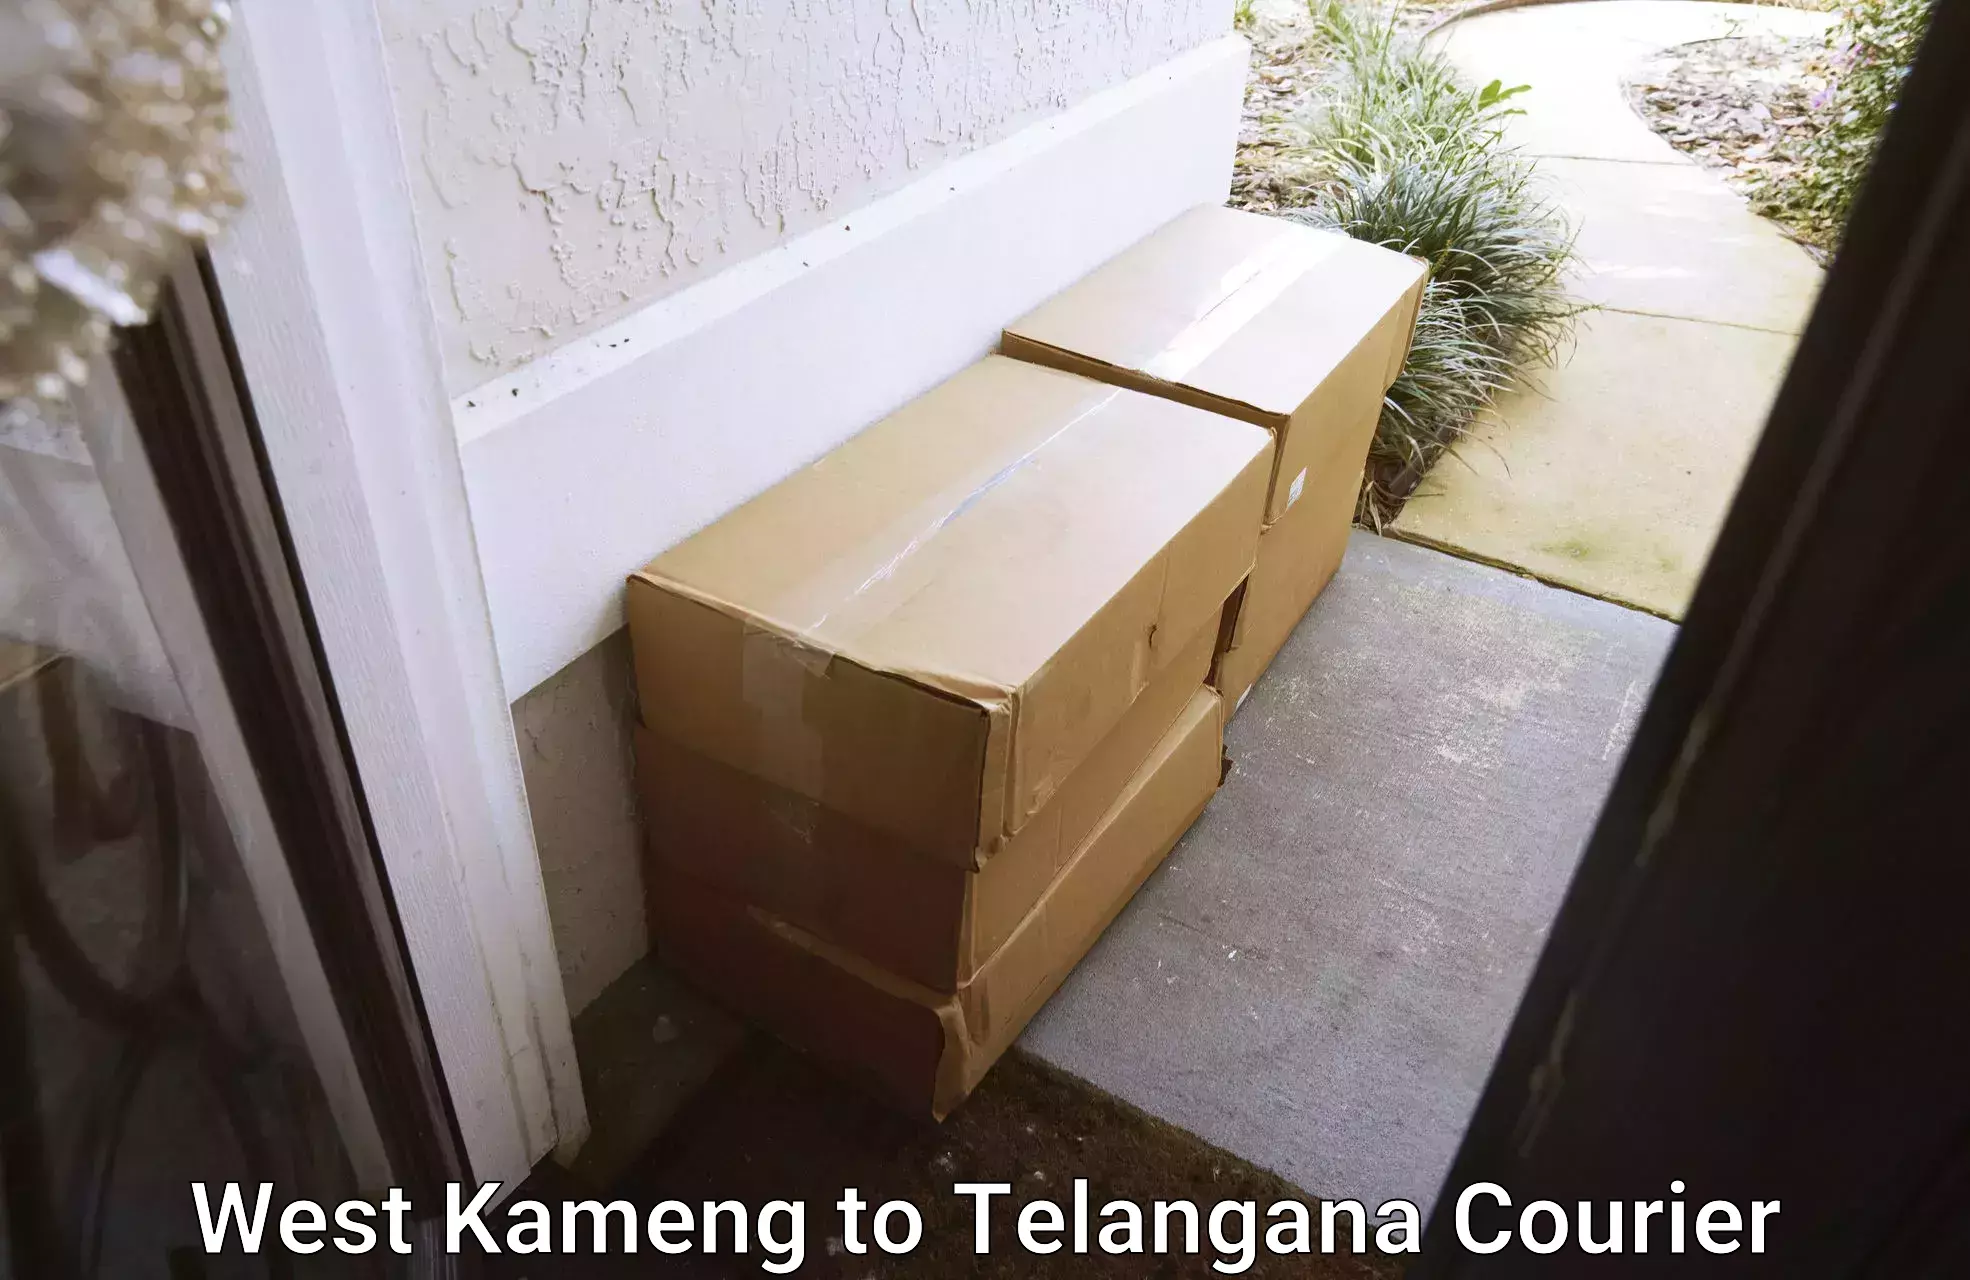 Courier service booking West Kameng to Sikanderguda